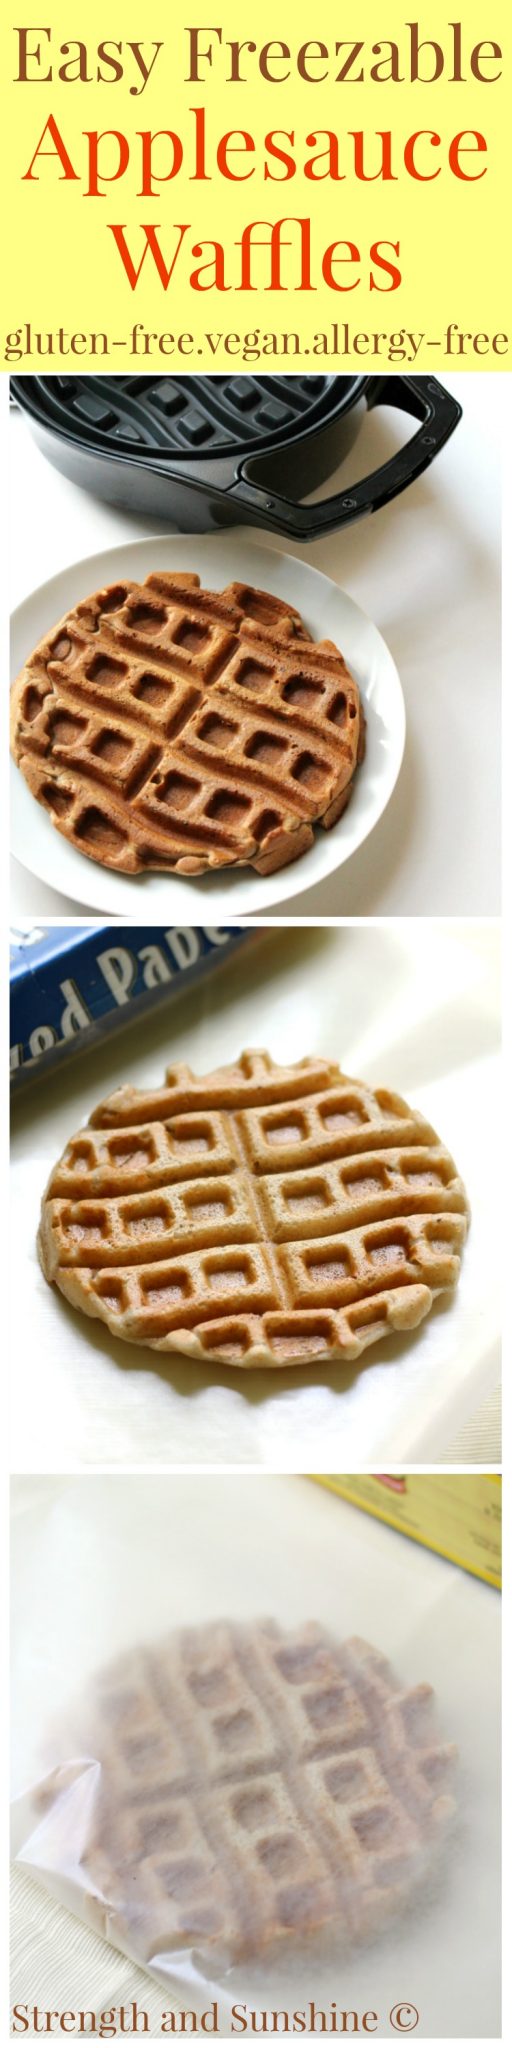 Easy Freezable Applesauce Waffles (Dippable!) | Strength and Sunshine @RebeccaGF666 A little breakfast meal prep and you'll always have an easy morning! These Freezable Applesauce Waffles are gluten-free, vegan, allergy-free, and dippable! A customizable recipe perfect for kids, teens, even adults!